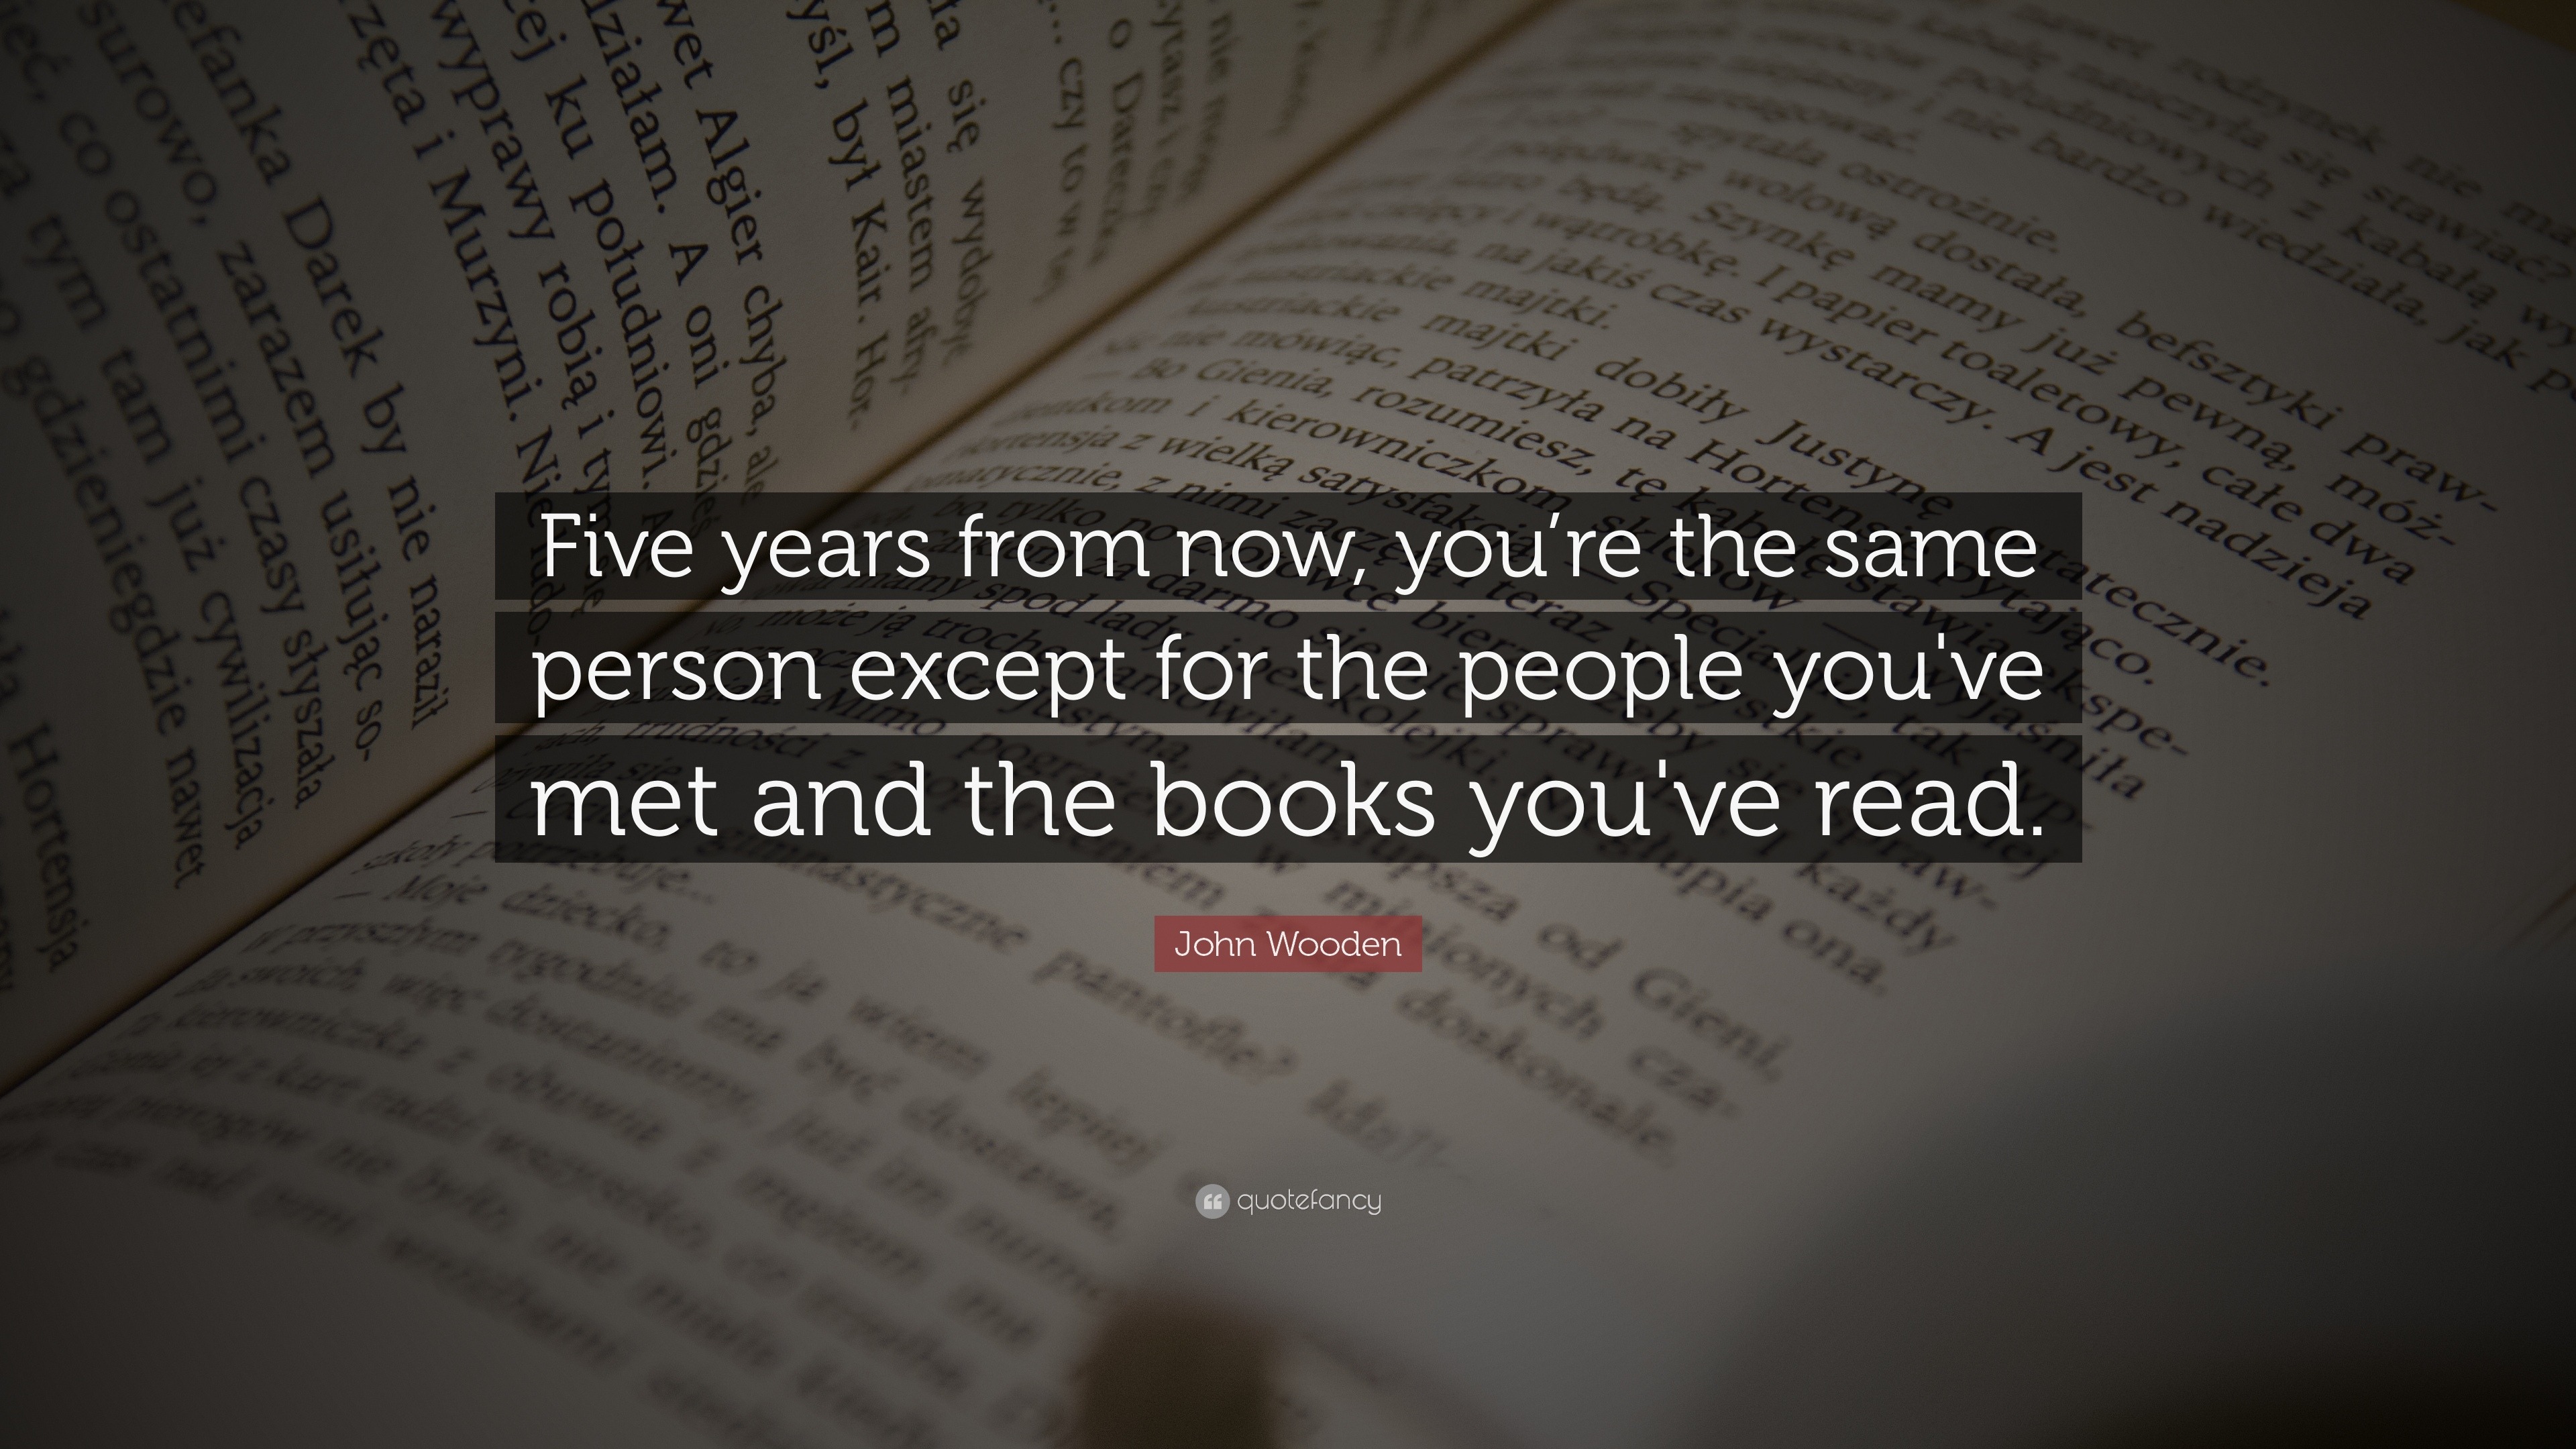 The 5 Book: Where Will You be Five Years from Today?